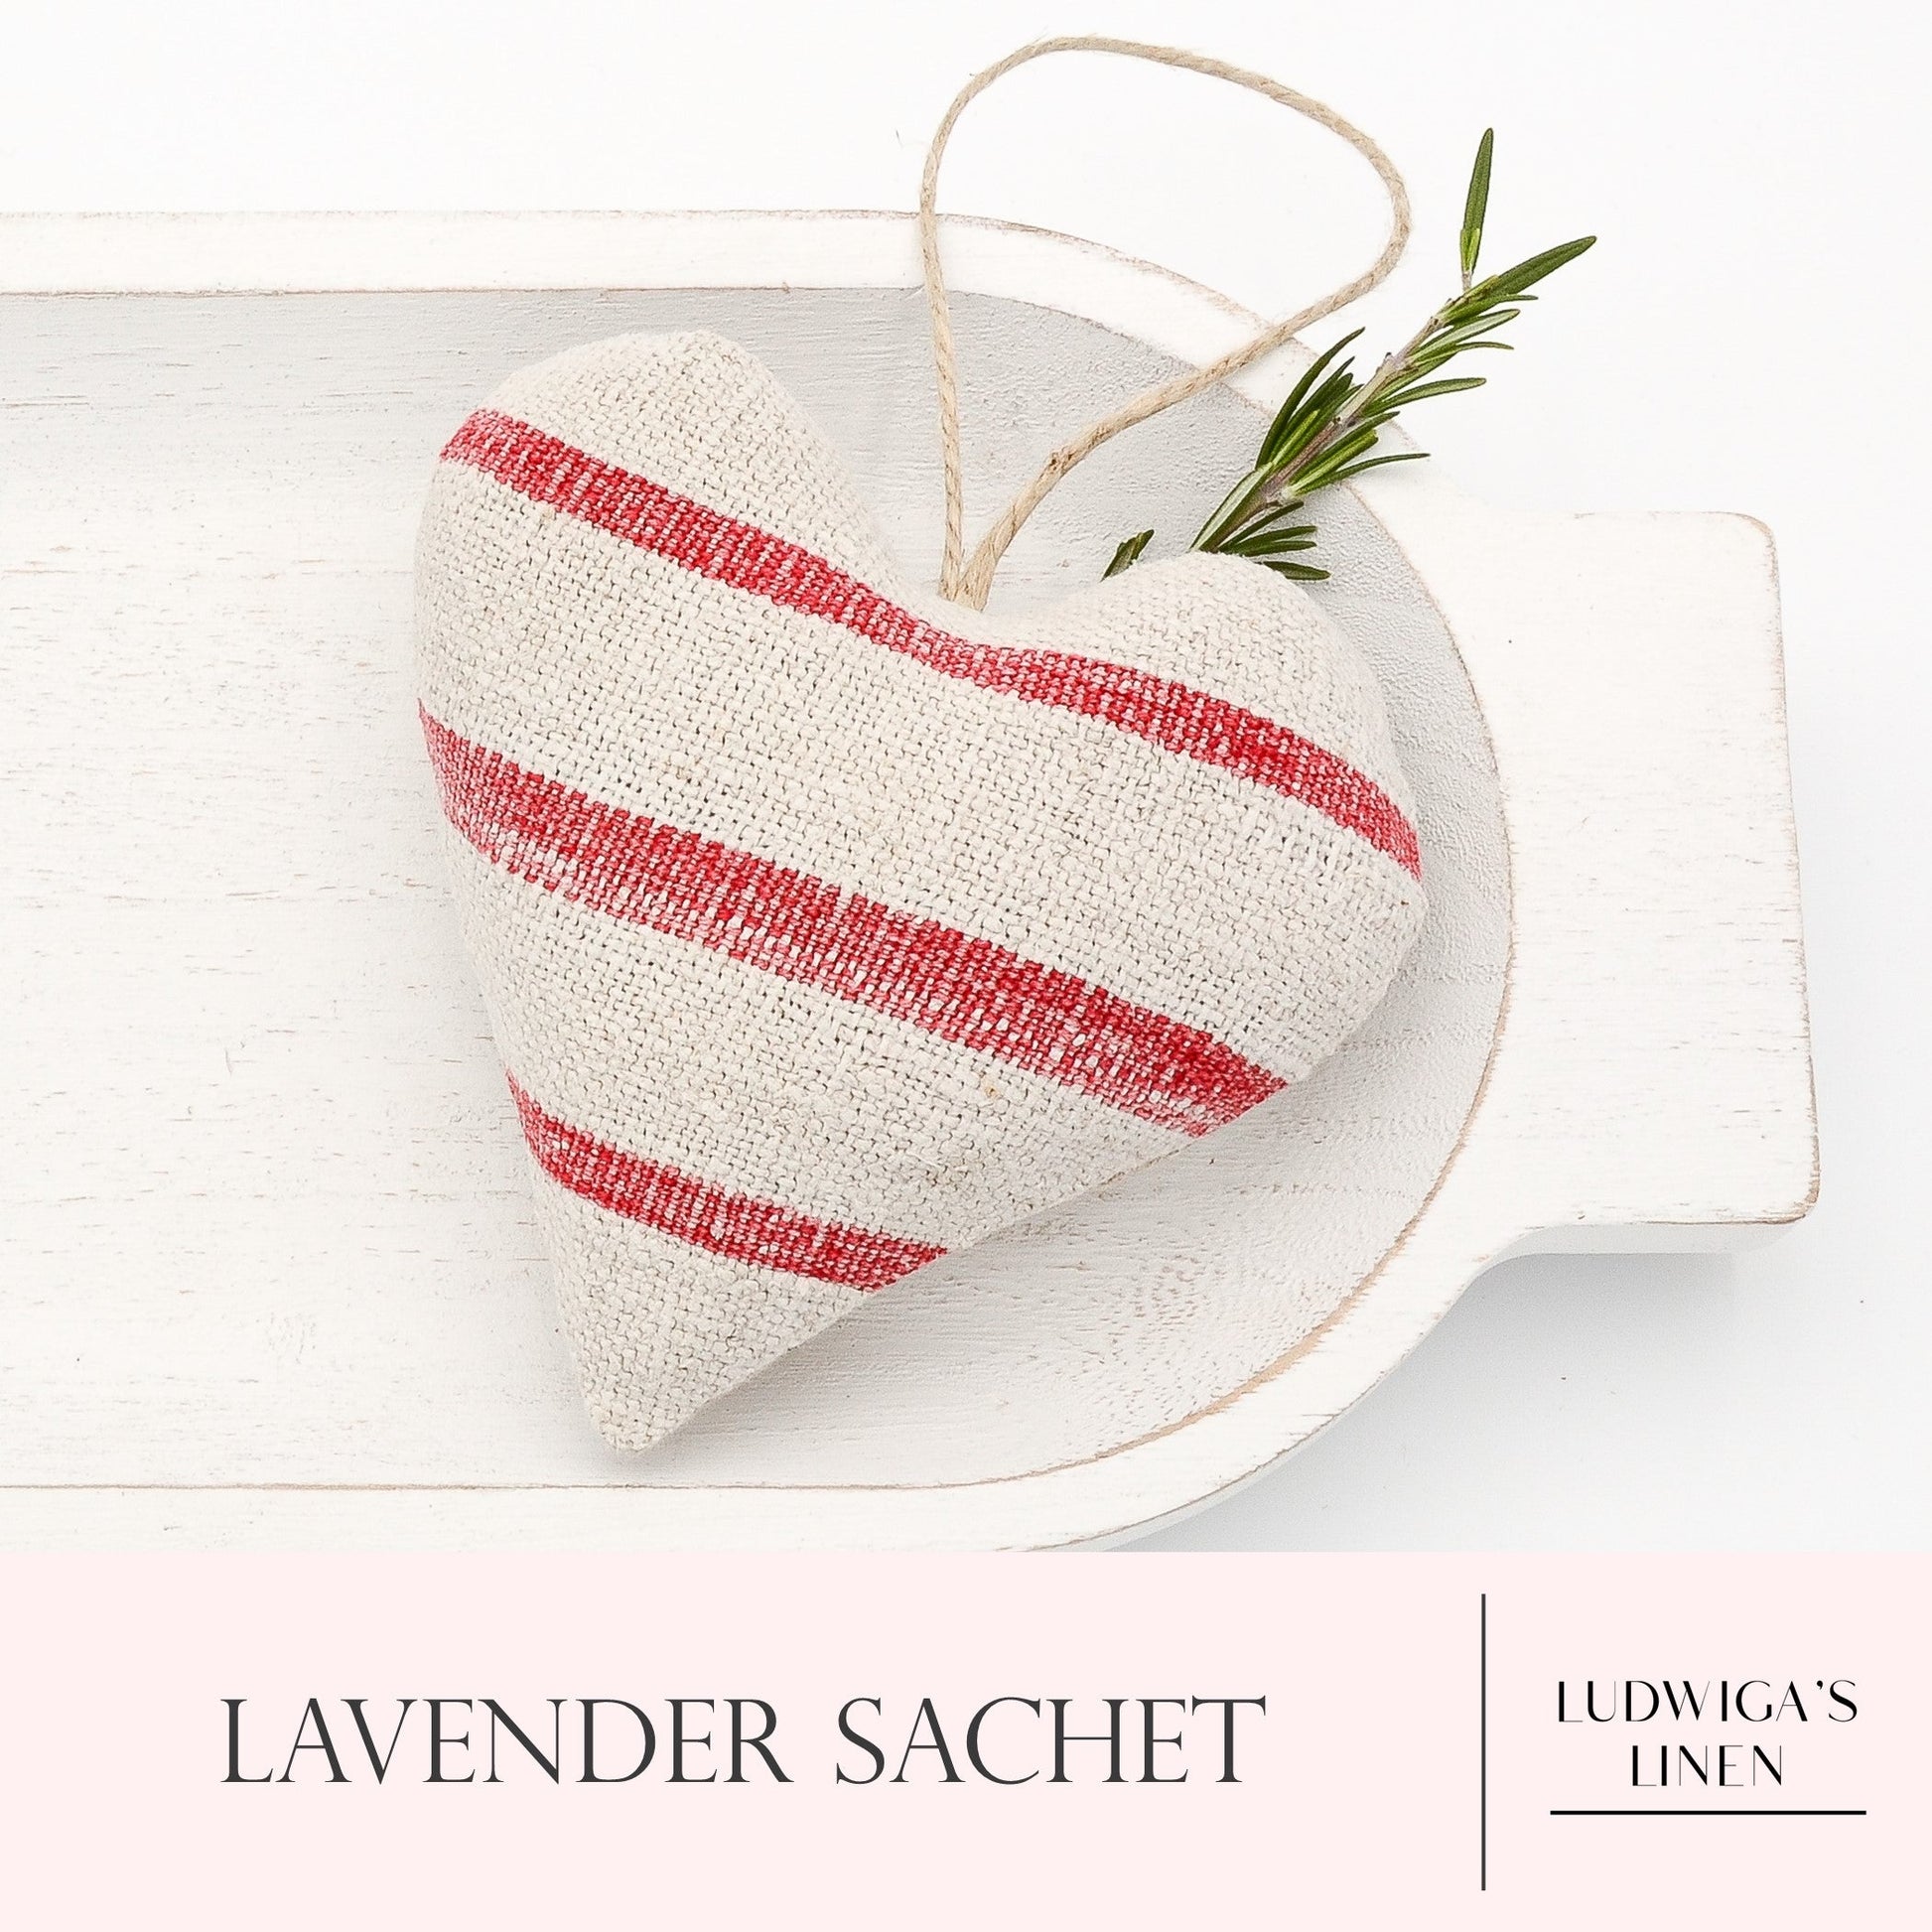 Lavender sachet heart made from antique European grain sack linen, hemp twine tie, and filled with high quality lavender from Provence France